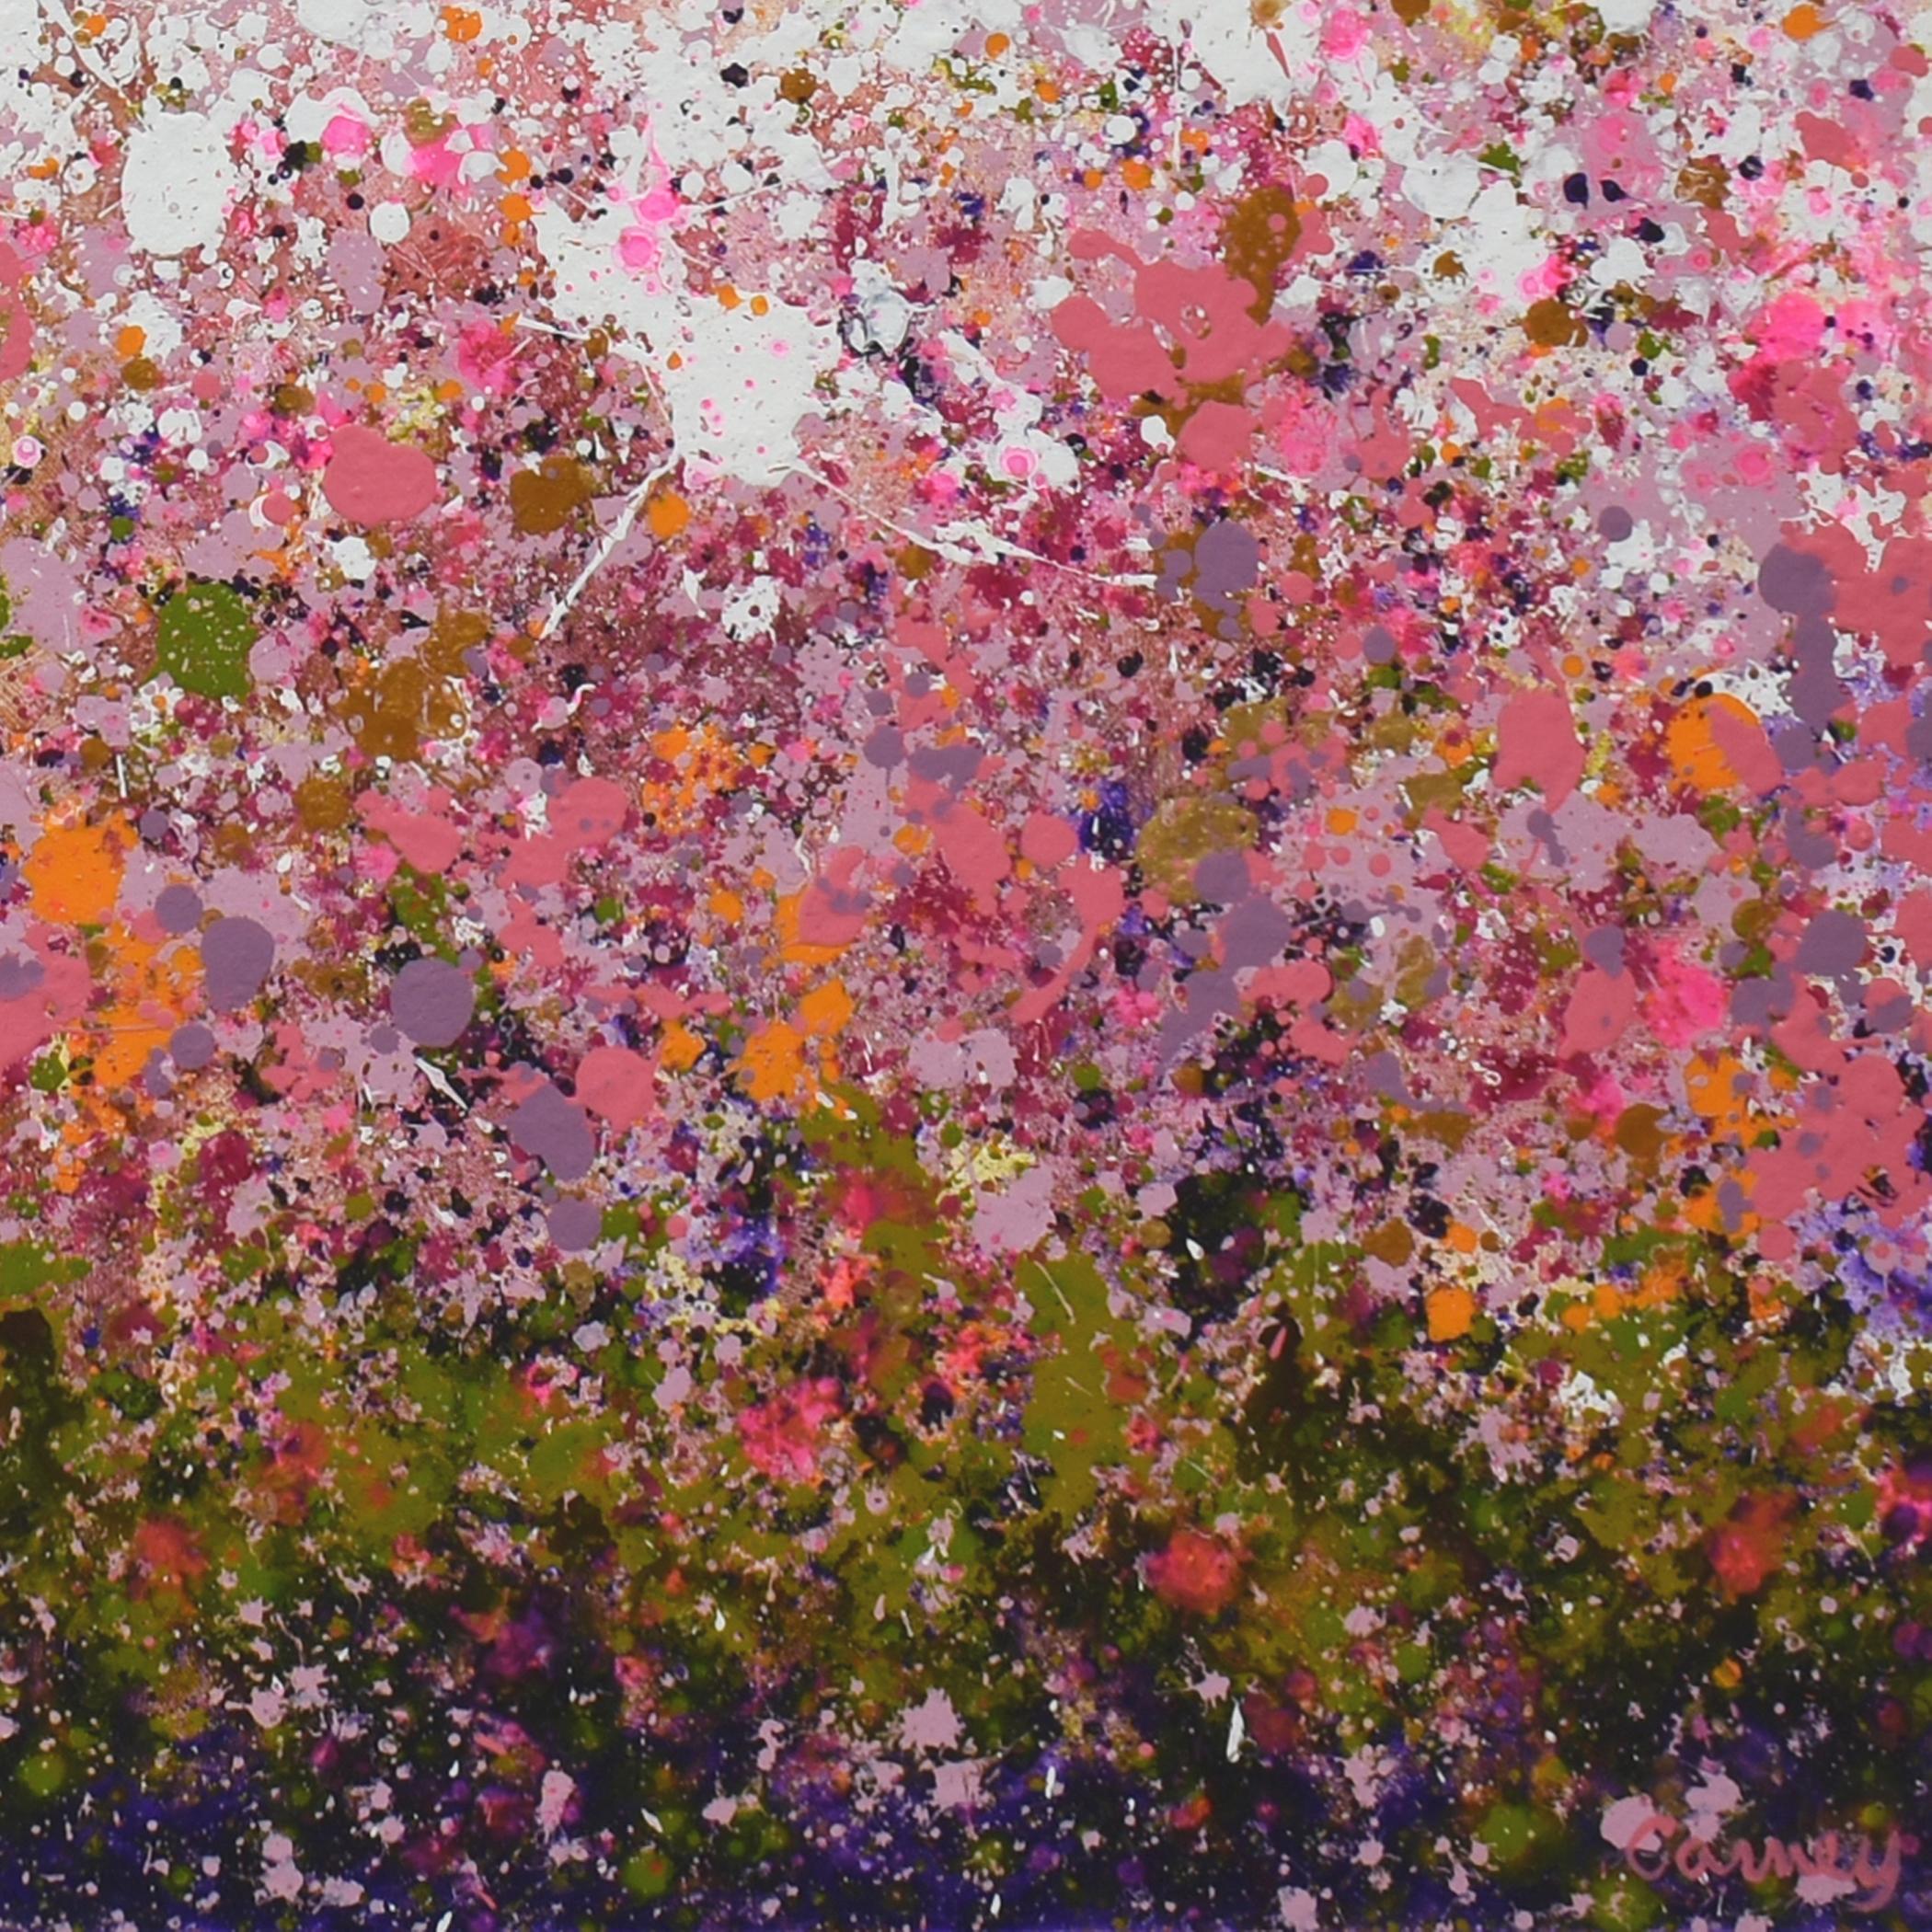 <p>Artist Comments<br />Energetic splatters of pink, purple, green and orange on a white backdrop. Part of Lisa Carney's signature GeoFlora series, a collection of abstracted botanical paintings where she uses drip and splash techniques to suggest